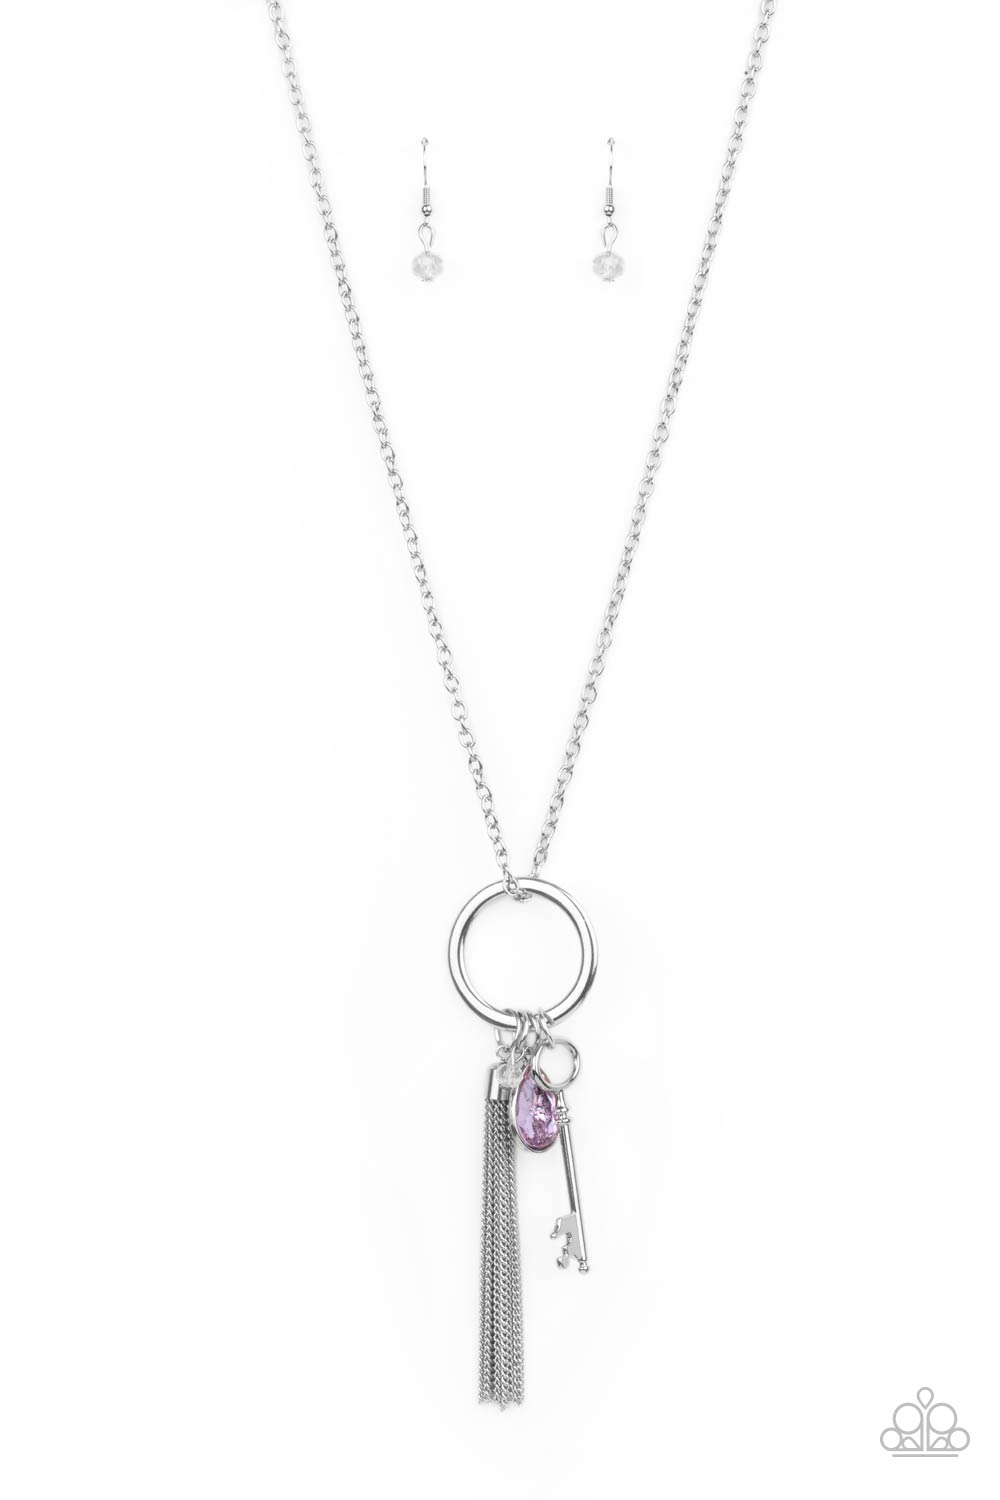 Unlock Your Sparkle - Purple and Silver Necklace - Paparazzi Accessories - A purple teardrop gem, silver key, dainty crystal-like bead, and shimmery silver chain tassel swings from the bottom of a silver ring at the bottom of a lengthened silver chain, creating a whimsically tasseled display. Features an adjustable clasp closure. Sold as one individual necklace.  Bejeweled Accessories By Kristie - Trendy fashion jewelry for everyone -